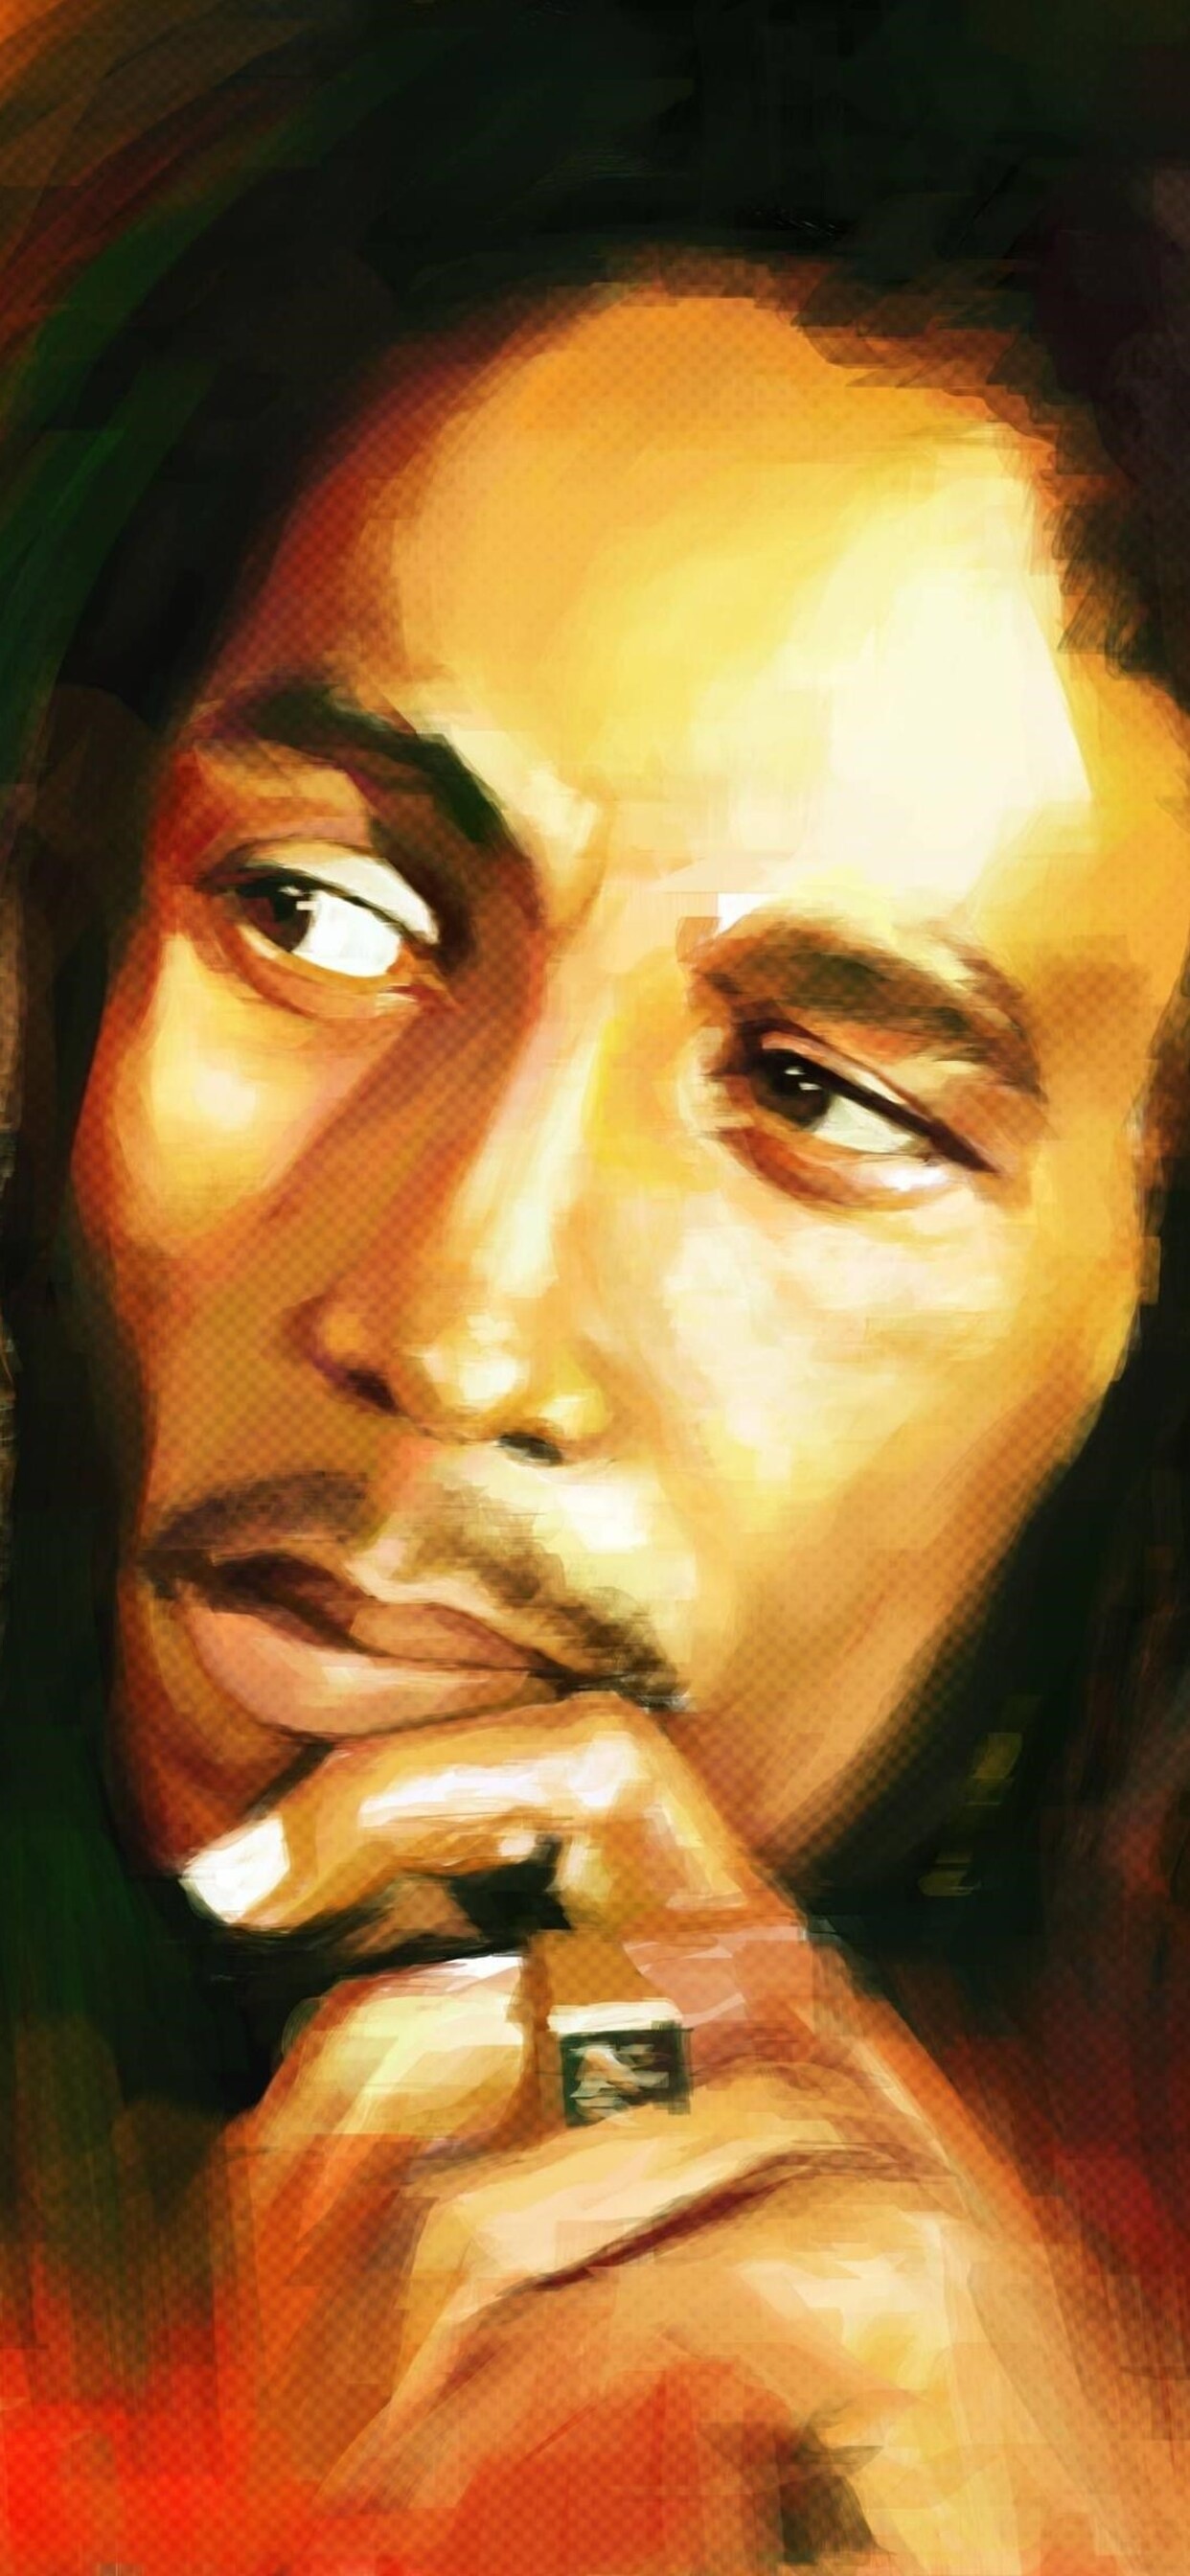 Bob Marley: Served as a world ambassador for reggae music and sold more than 20 million records. 1250x2690 HD Background.